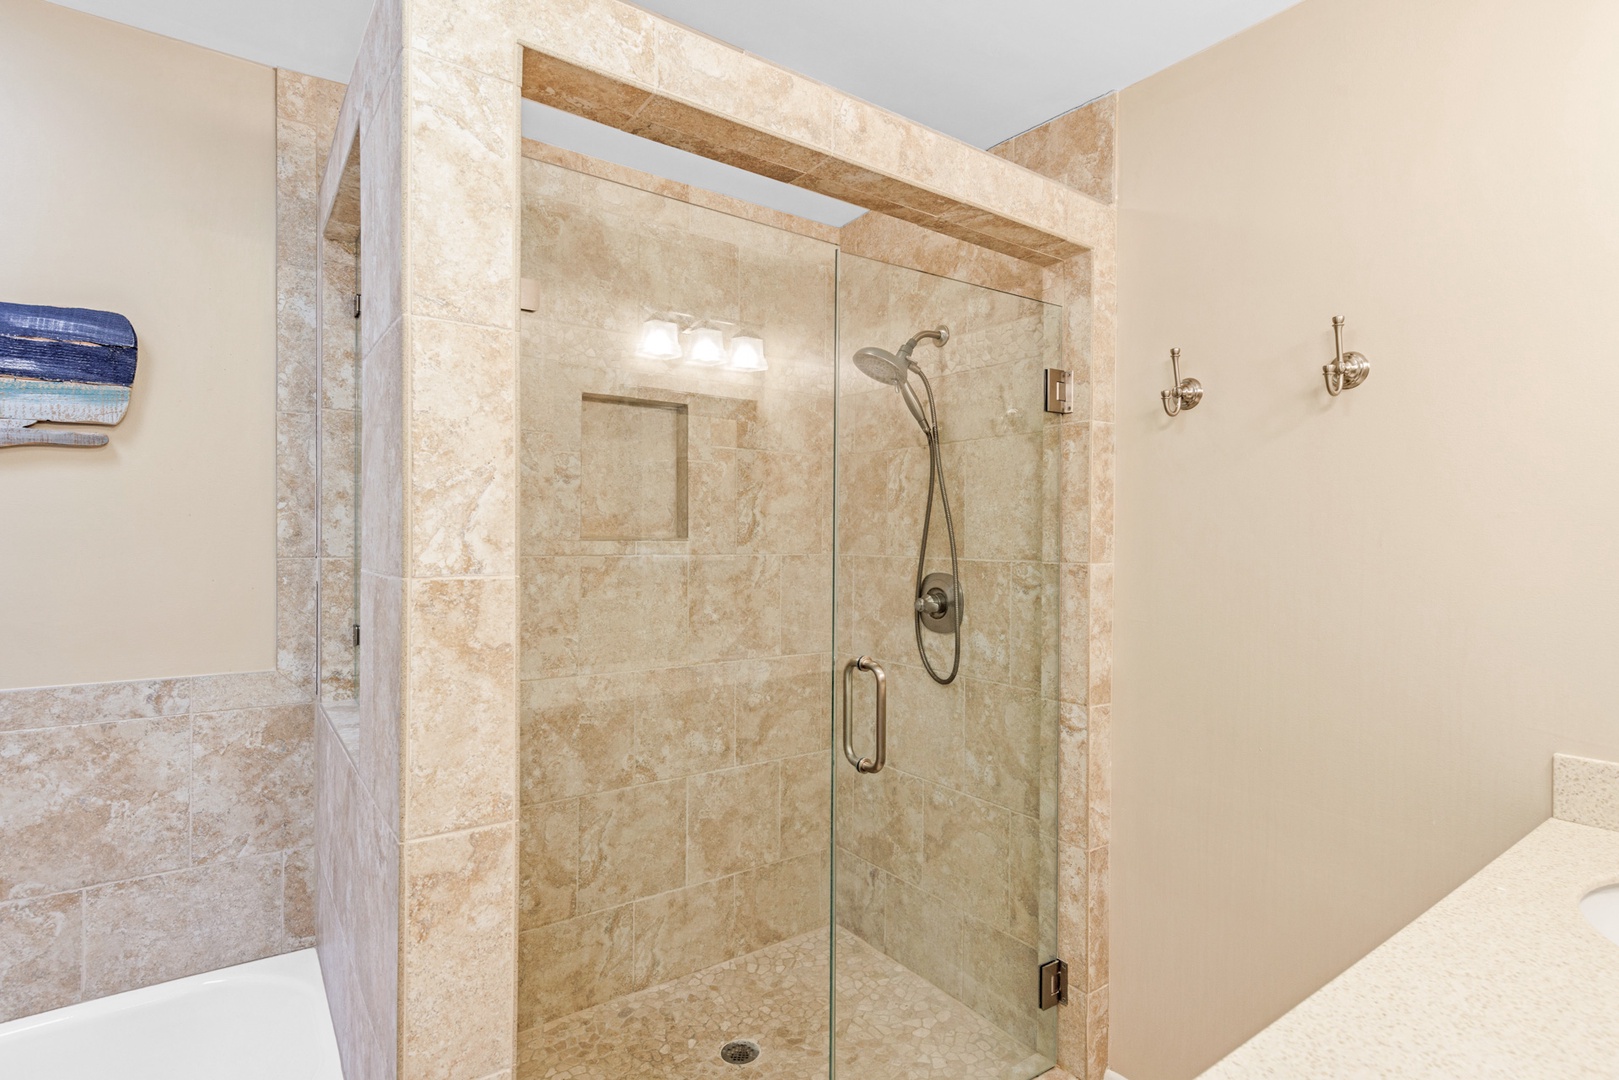 The second bedroom ensuite offers a double vanity, shower & separate tub